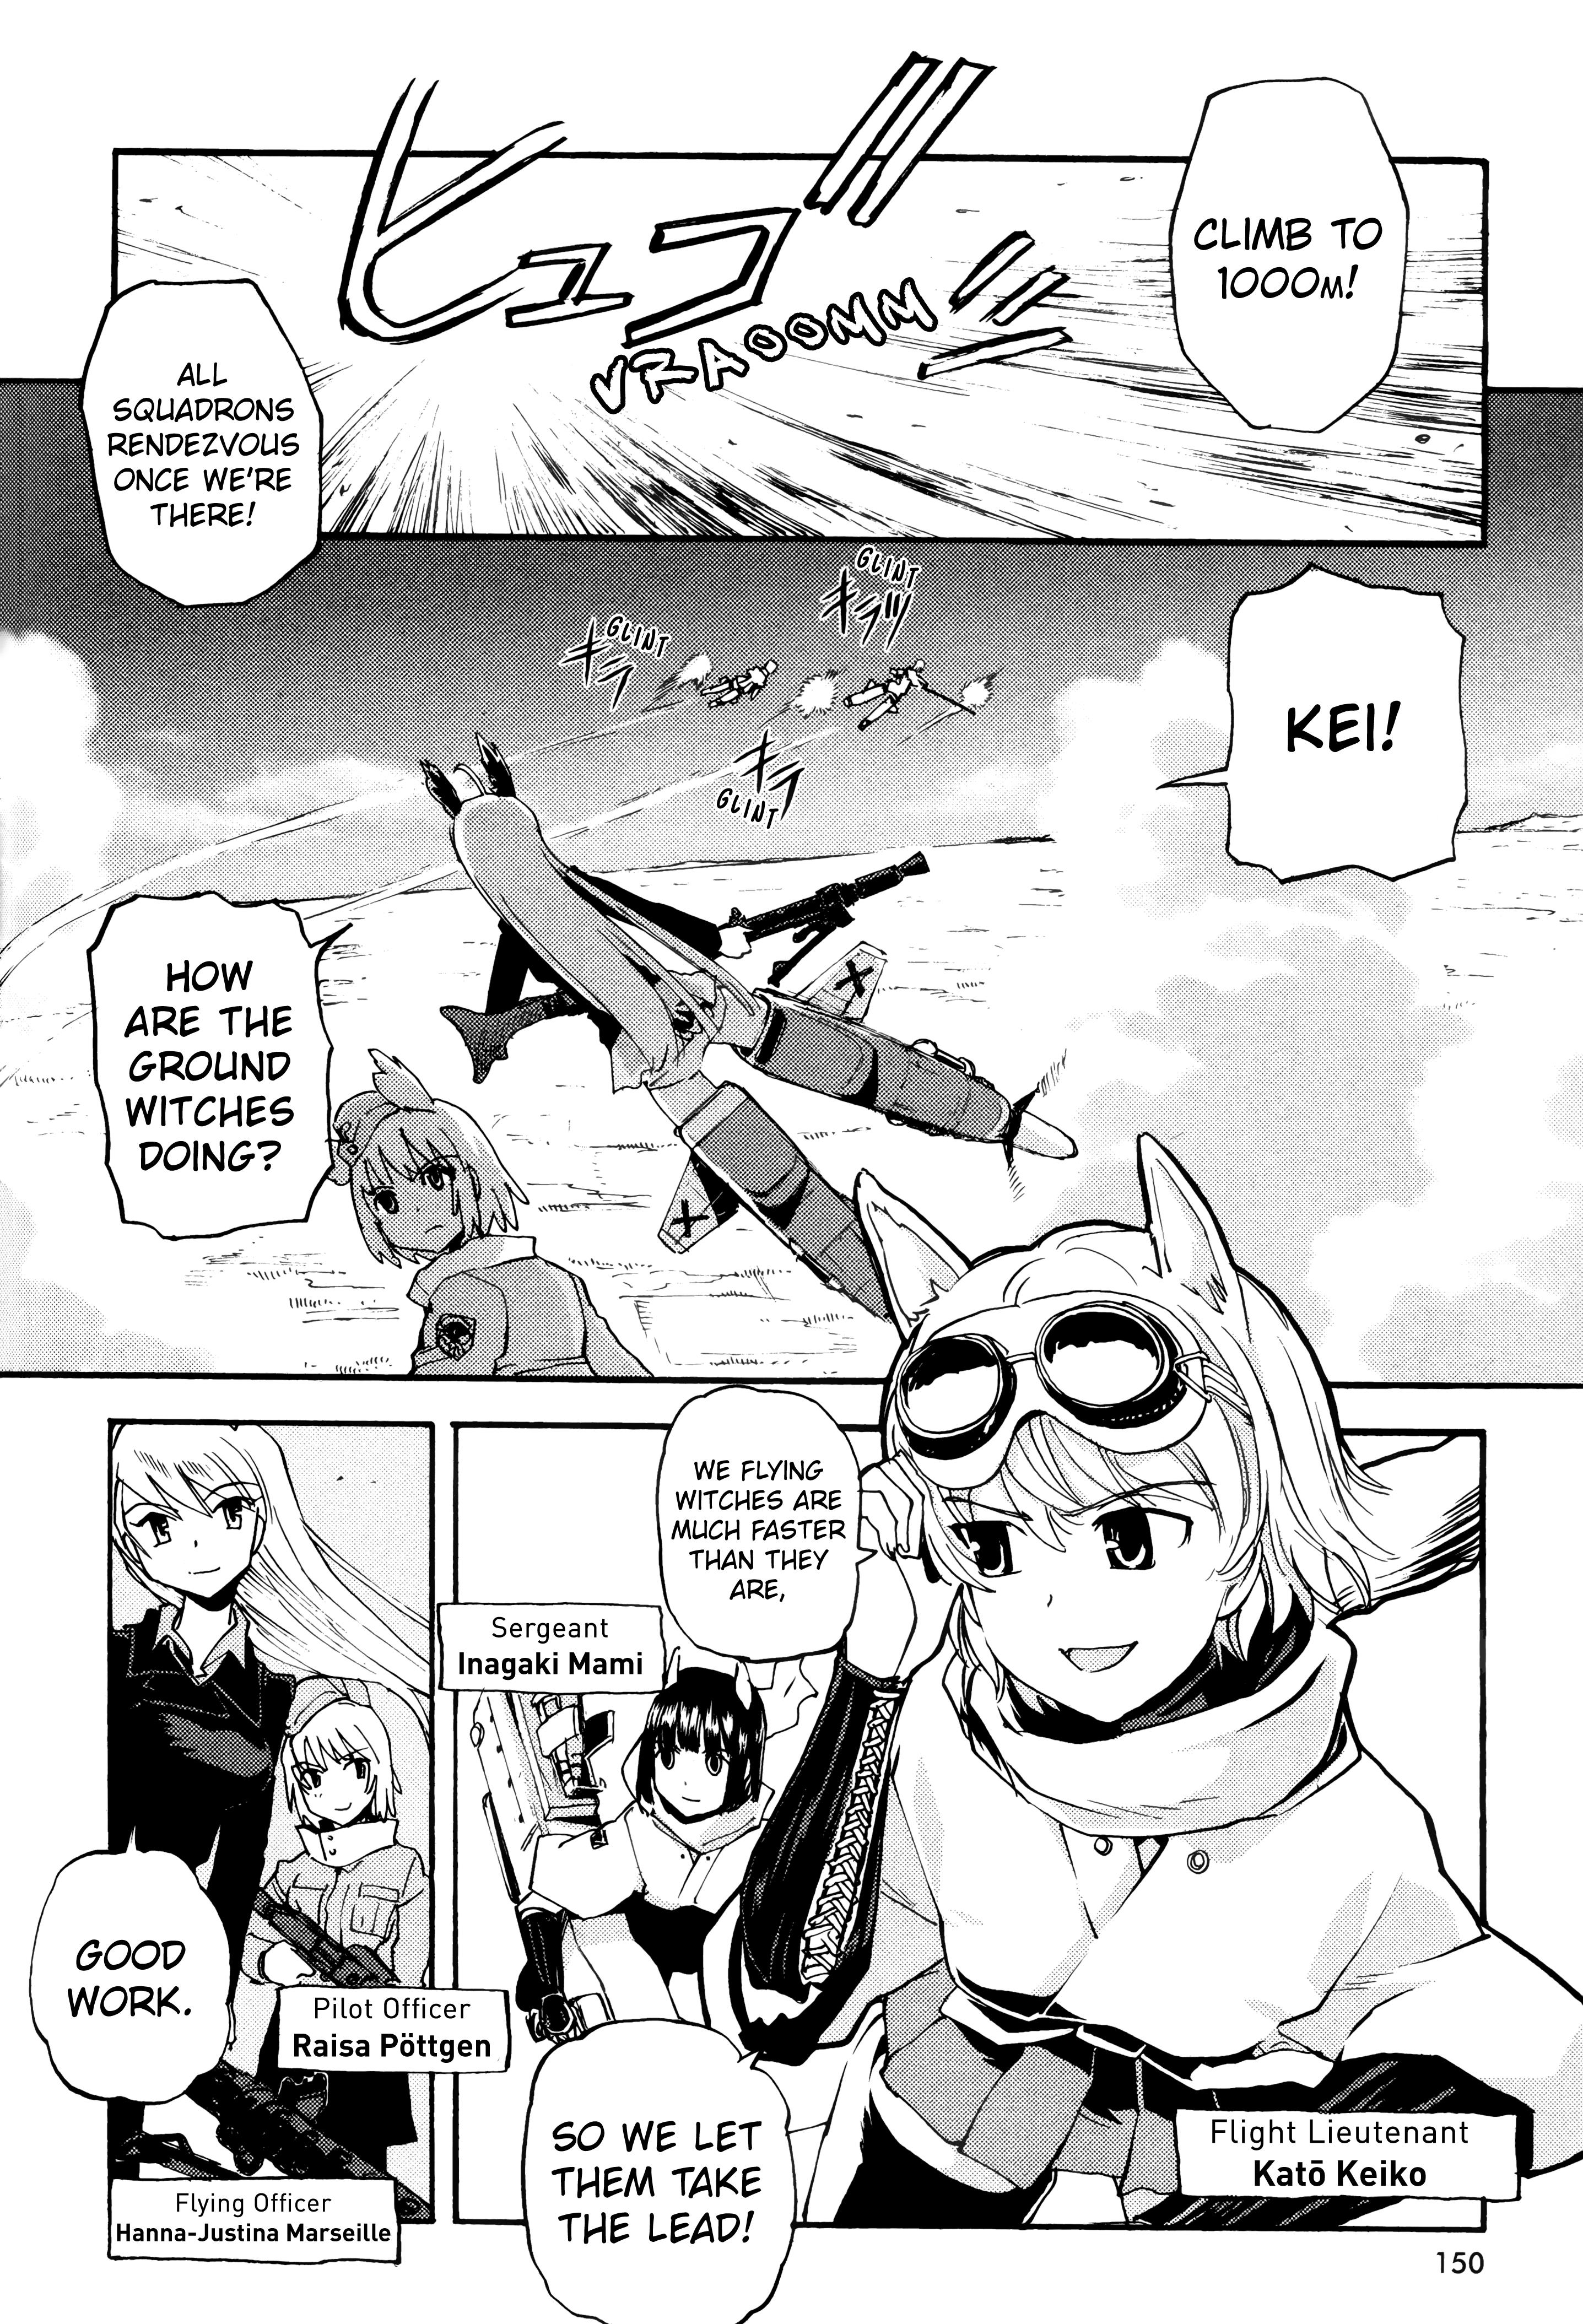 Strike Witches - The Witches Of Andorra - Page 3